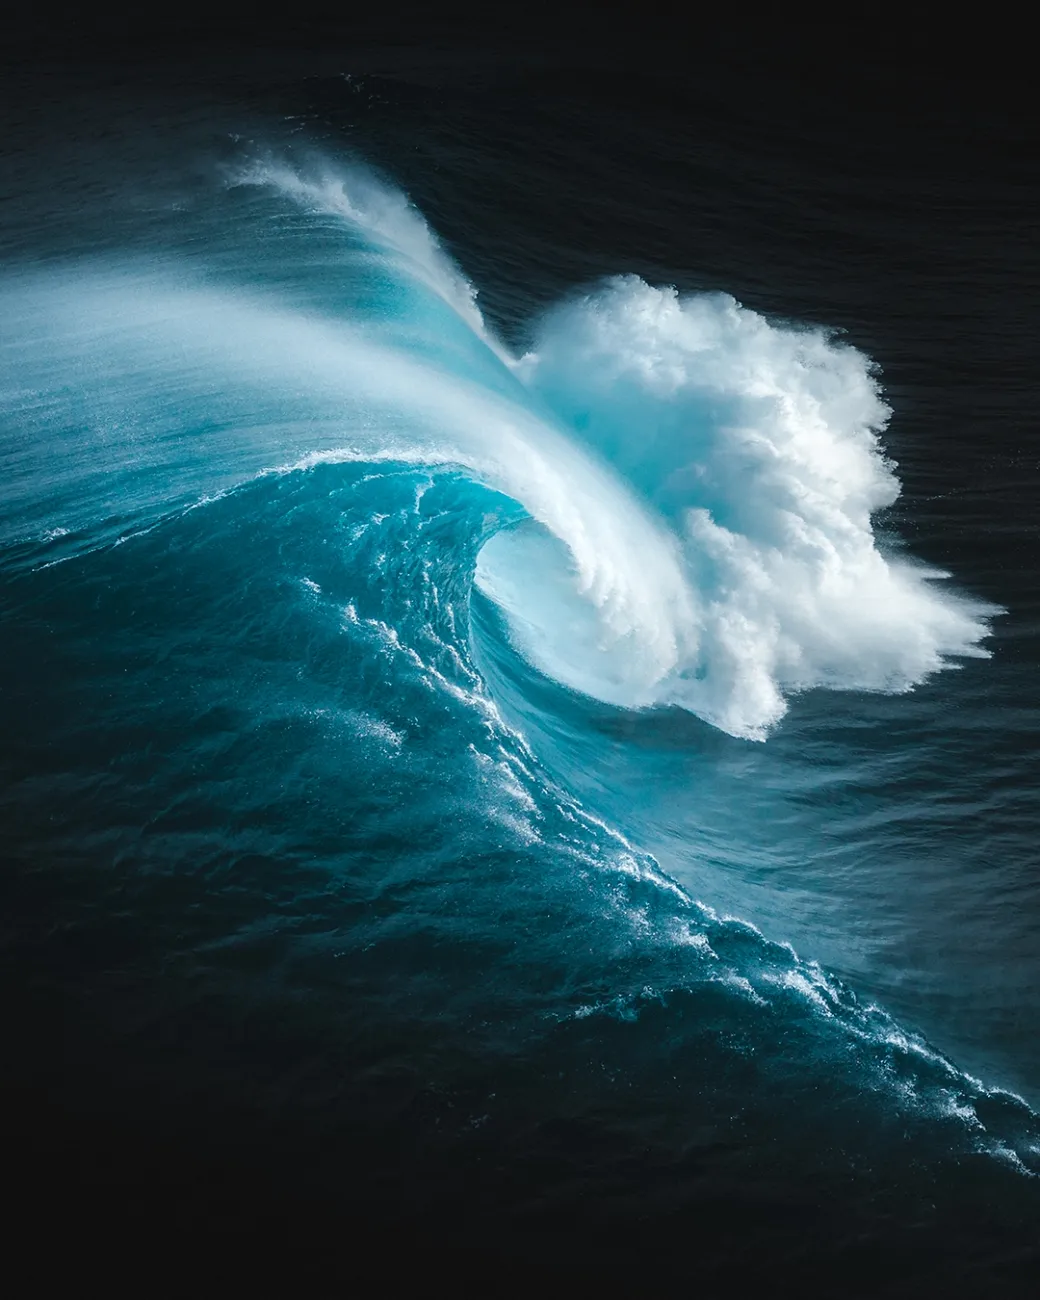 A huge dark blue wave fills the frame, moving from left to right. The edges of the wave are white and curling downwards, crashing into the surface of the water below.